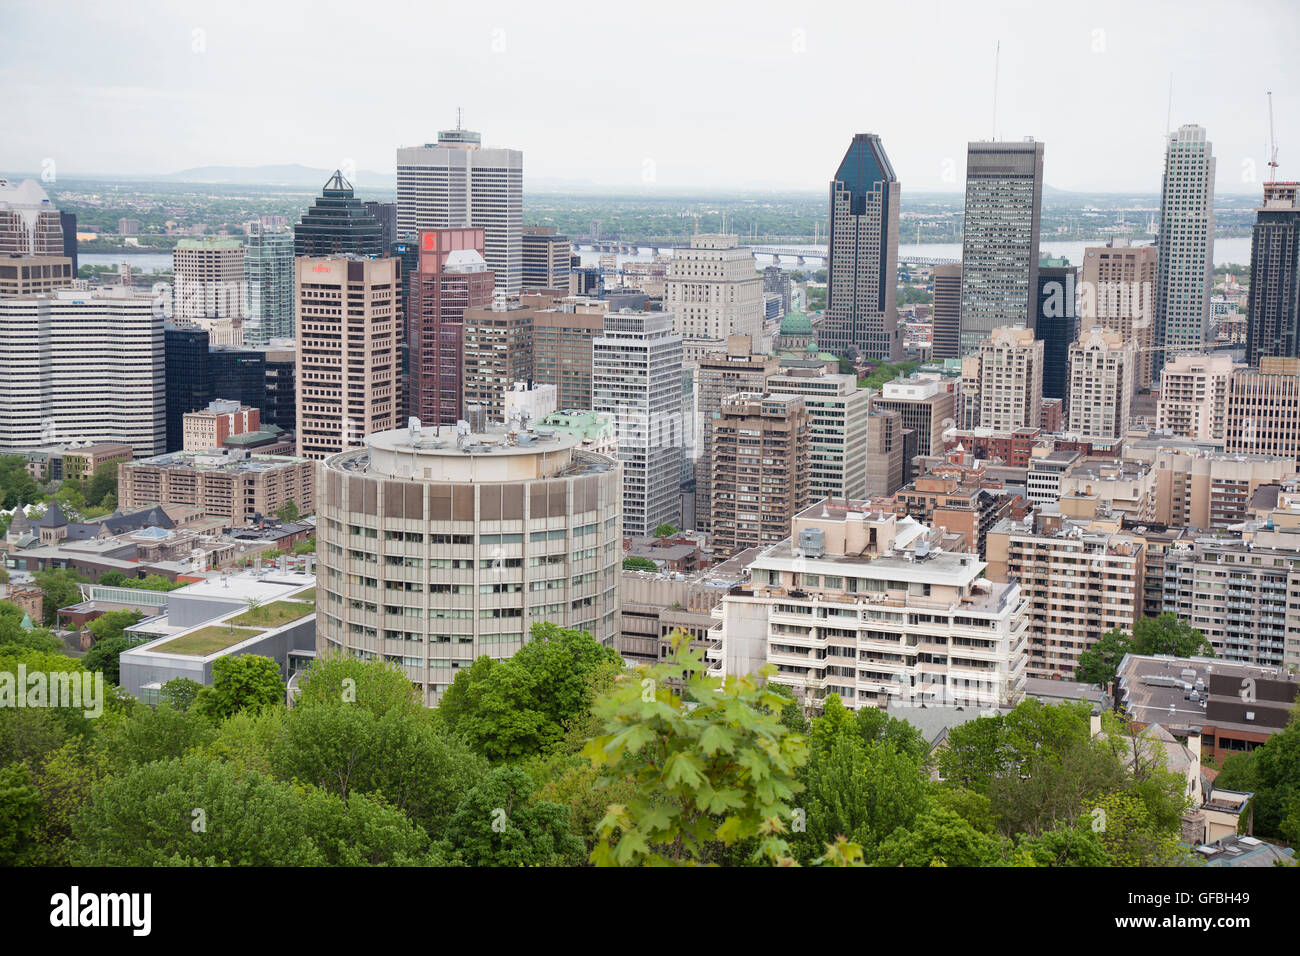 MONTREAL - MAY 26, 2016: View of downtown Montreal from the top of Mont Royal Park. Stock Photo